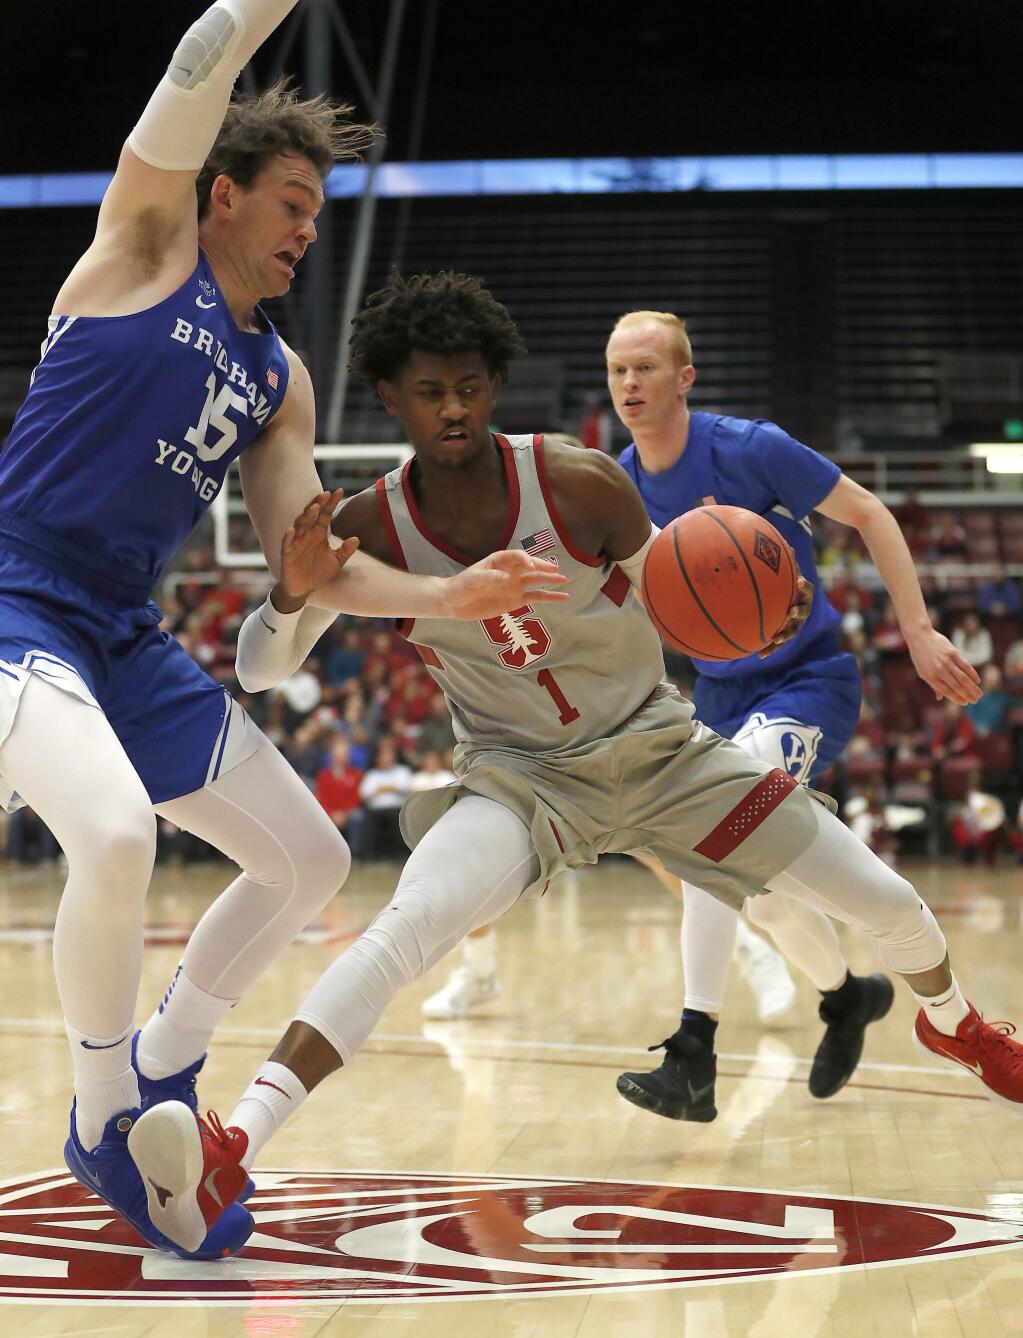 Stanford guard Daejon Davis (1) drives against BYU forward Payton Dastrup (15) during the first half in the first round of the NIT on Wednesday, March 14, 2018, in Stanford. (AP Photo/ Tony Avelar)